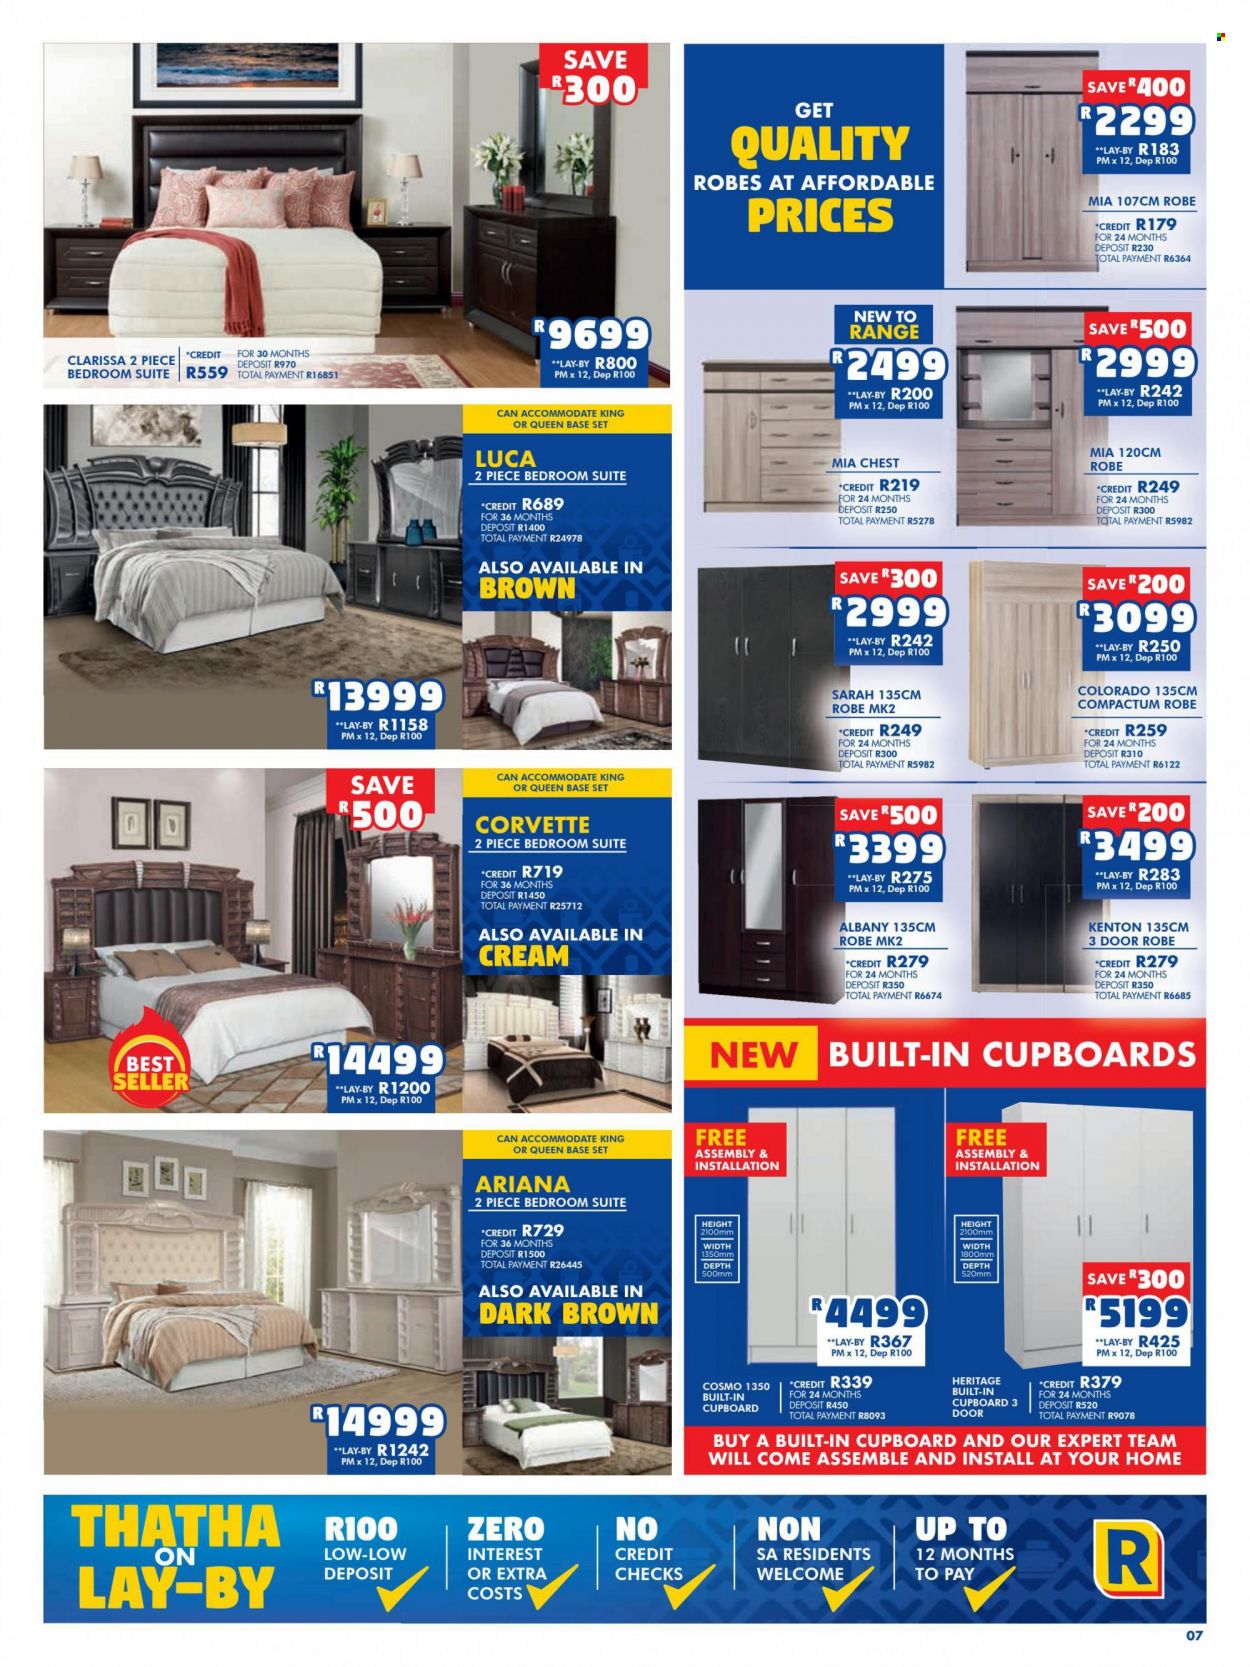 Russells Specials  - 05.09.2022 - 06.05.2022. Page 7.